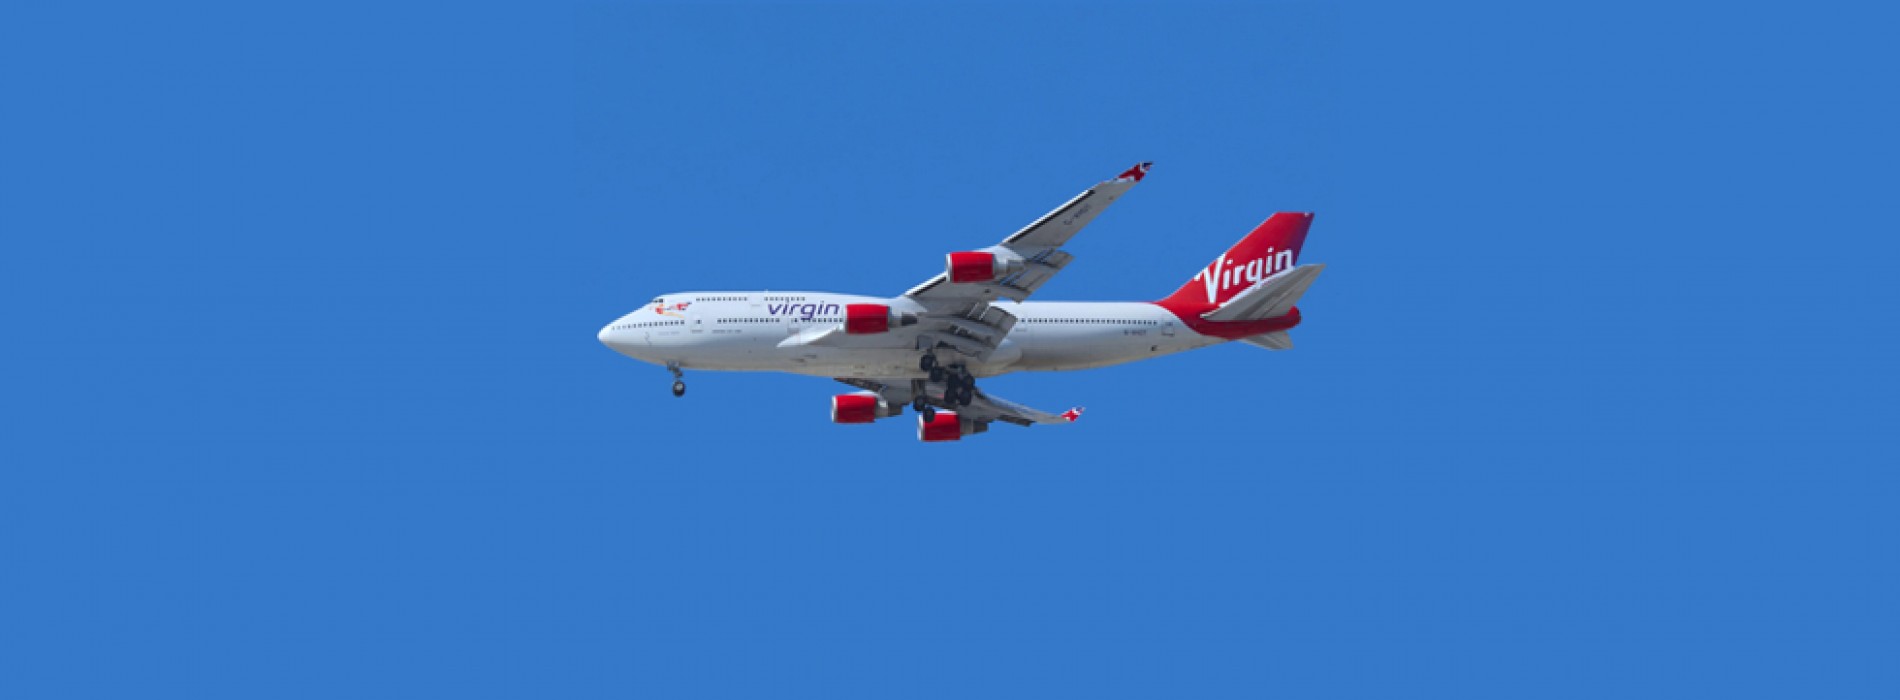 Virgin Atlantic launches 70-hour sale for India’s 70th Independence Day Celebration